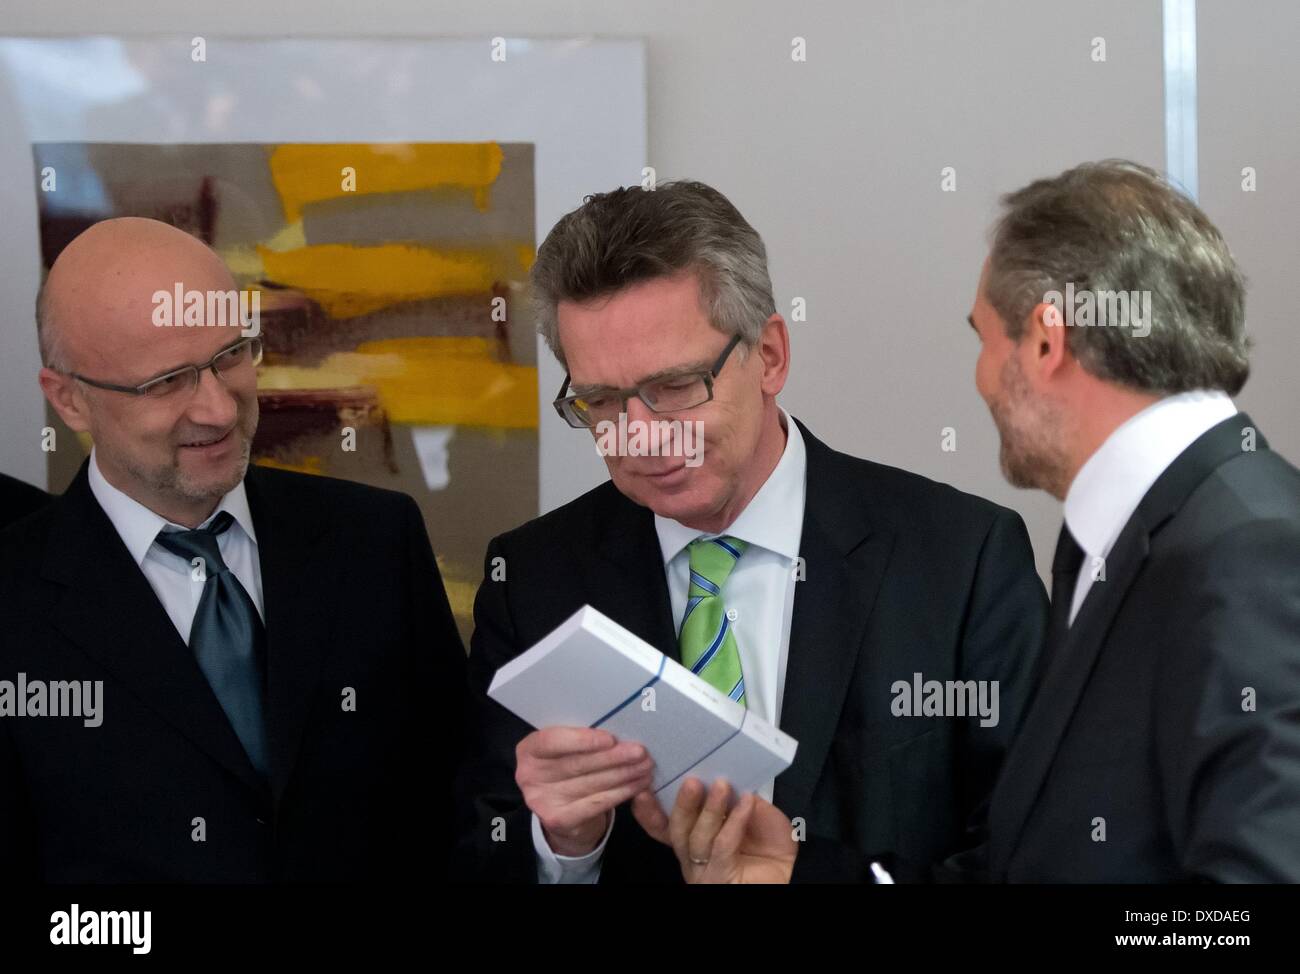 Berlib, Germany. 24th Mar, 2014. German Minister of the Interior Thomas de Maiziere (CDU, C) talks to representative of the Islamic Community of Bosniaks in Germany, Bernes Alihodzic (L) and chairman of the Turkish-Islamic Union, Bekir Alboga (R) before a consultation in Berlib, Germany, 24 March 2014. The German Minister of the Interior and representatives of Islamic organisations intend to discuss the new format of the German Islam Conference (DIK), which has existed since 2006. Photo: SOEREN STACHE/DPA/Alamy Live News Stock Photo